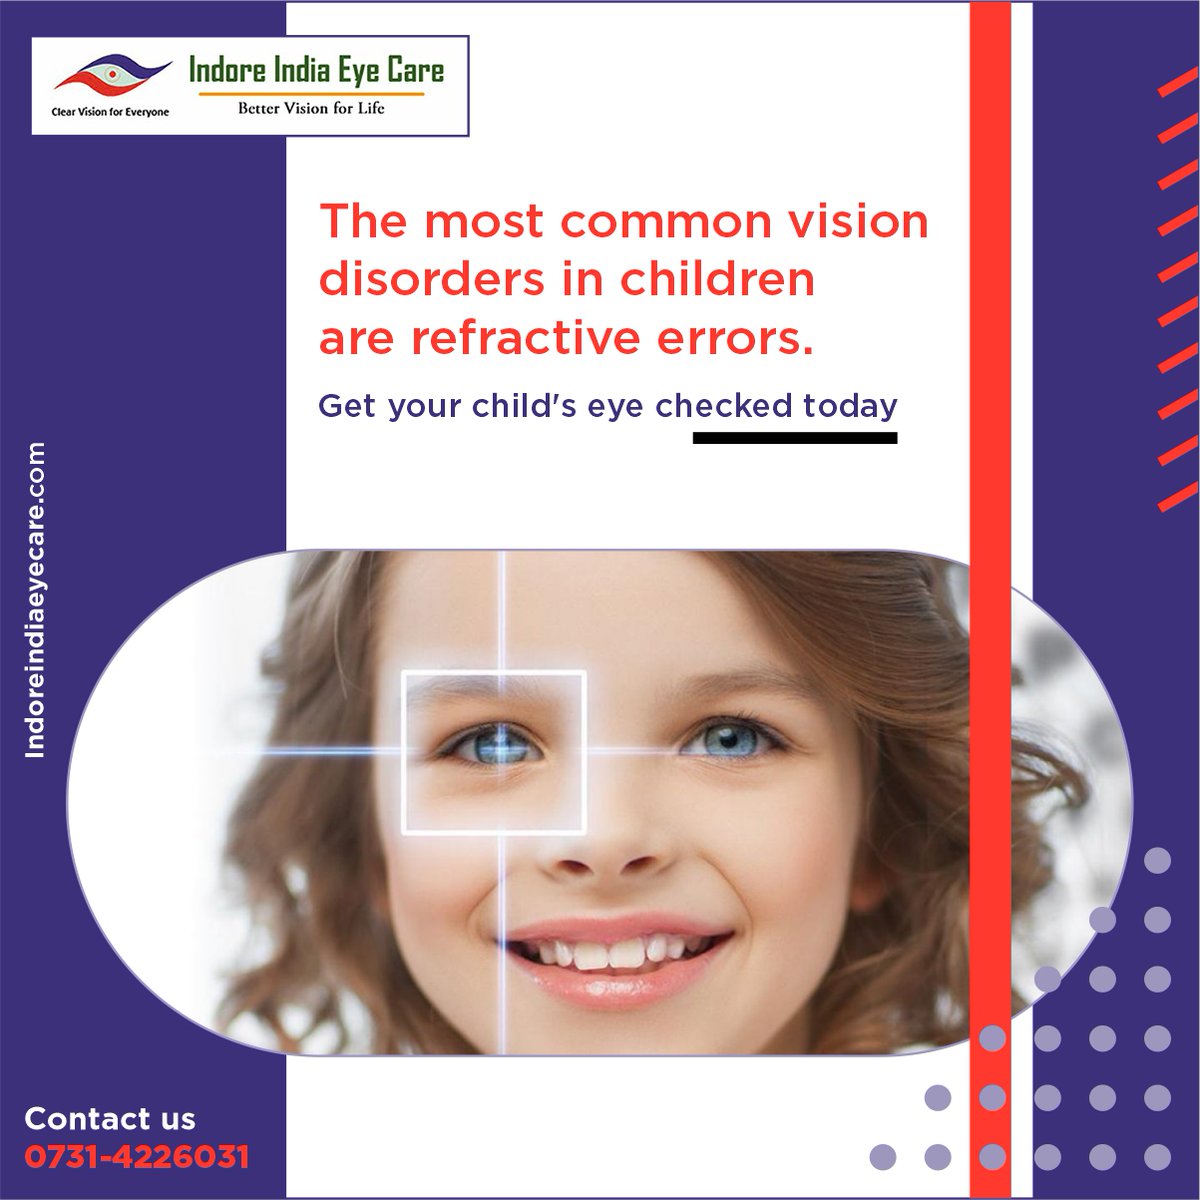 VISION DISORDER
The most common vision disorders in children are refractive errors.
Get your child eyes checked today.
#VisionDisorder #RefractiveErrors #ClearVision #EyeCare #HalthyVision #VisionForLife